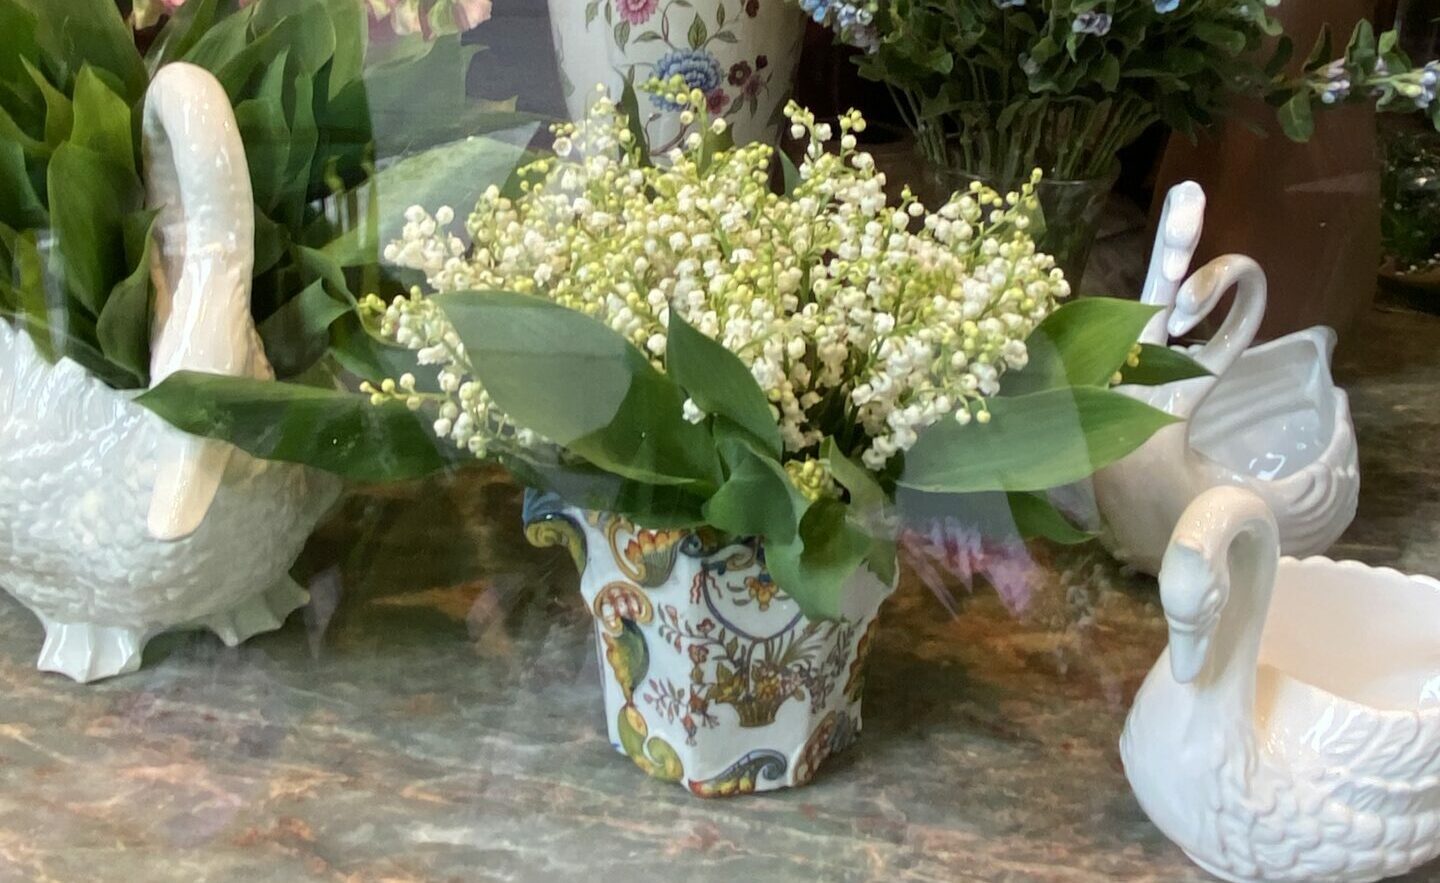 Lily of the valley plant in a shop window.